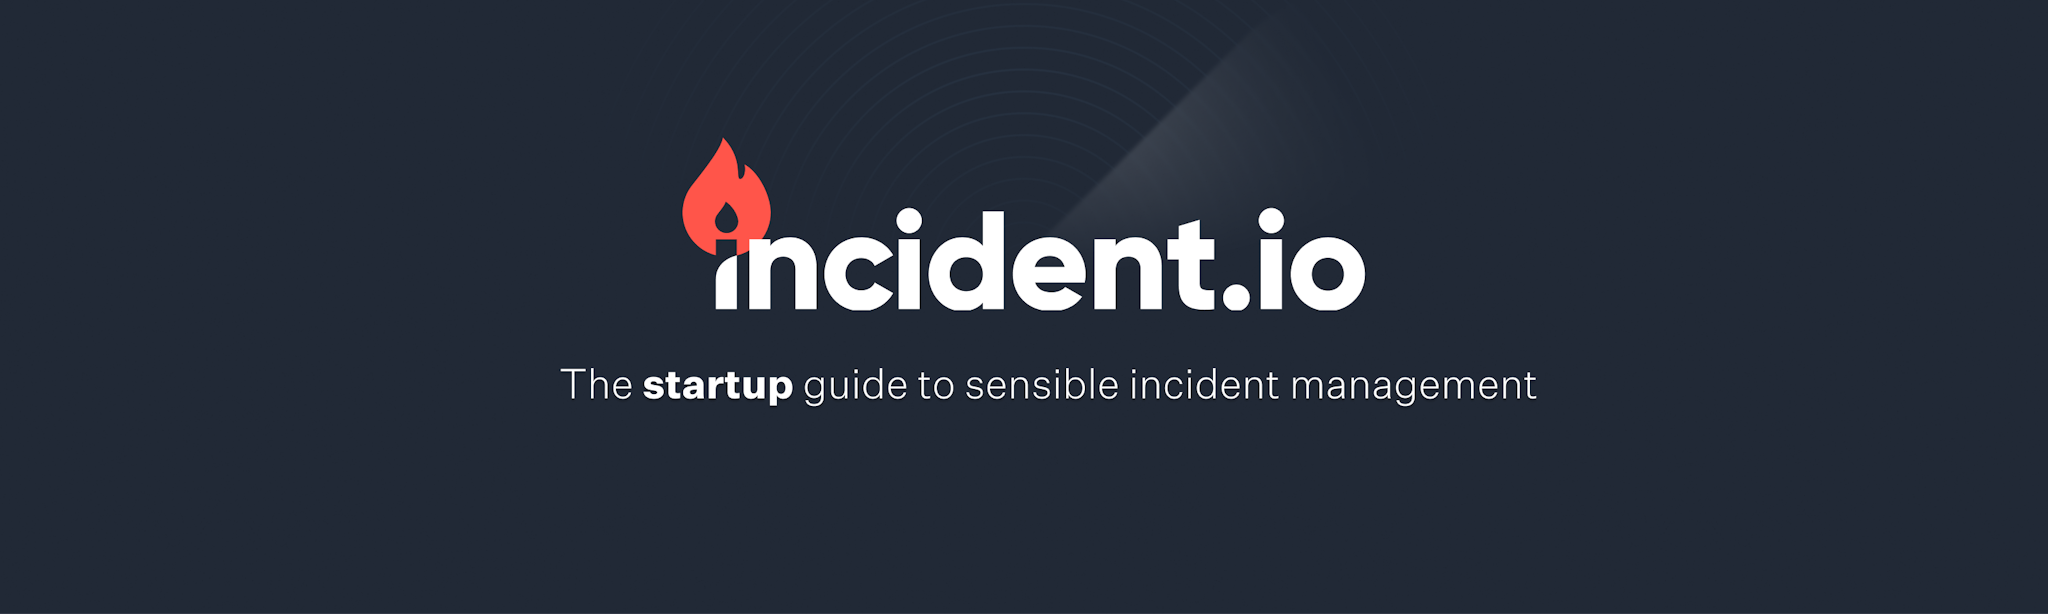 The startup guide to sensible incident management